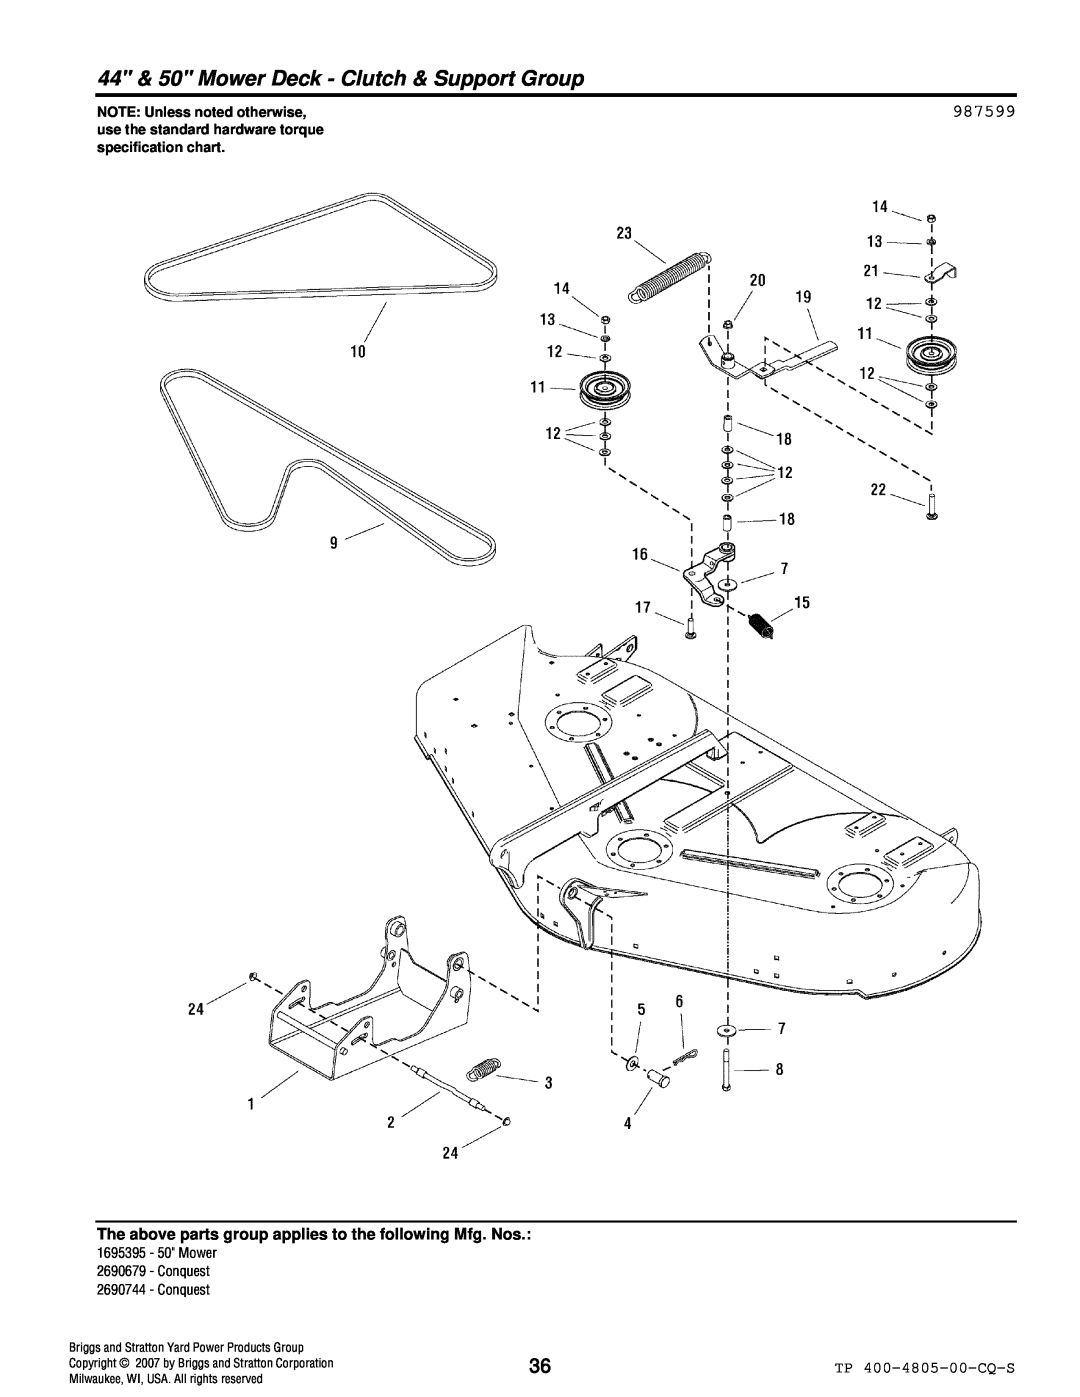 Simplicity 4WD Series manual 44 & 50 Mower Deck - Clutch & Support Group, 987599, NOTE: Unless noted otherwise, Conquest 